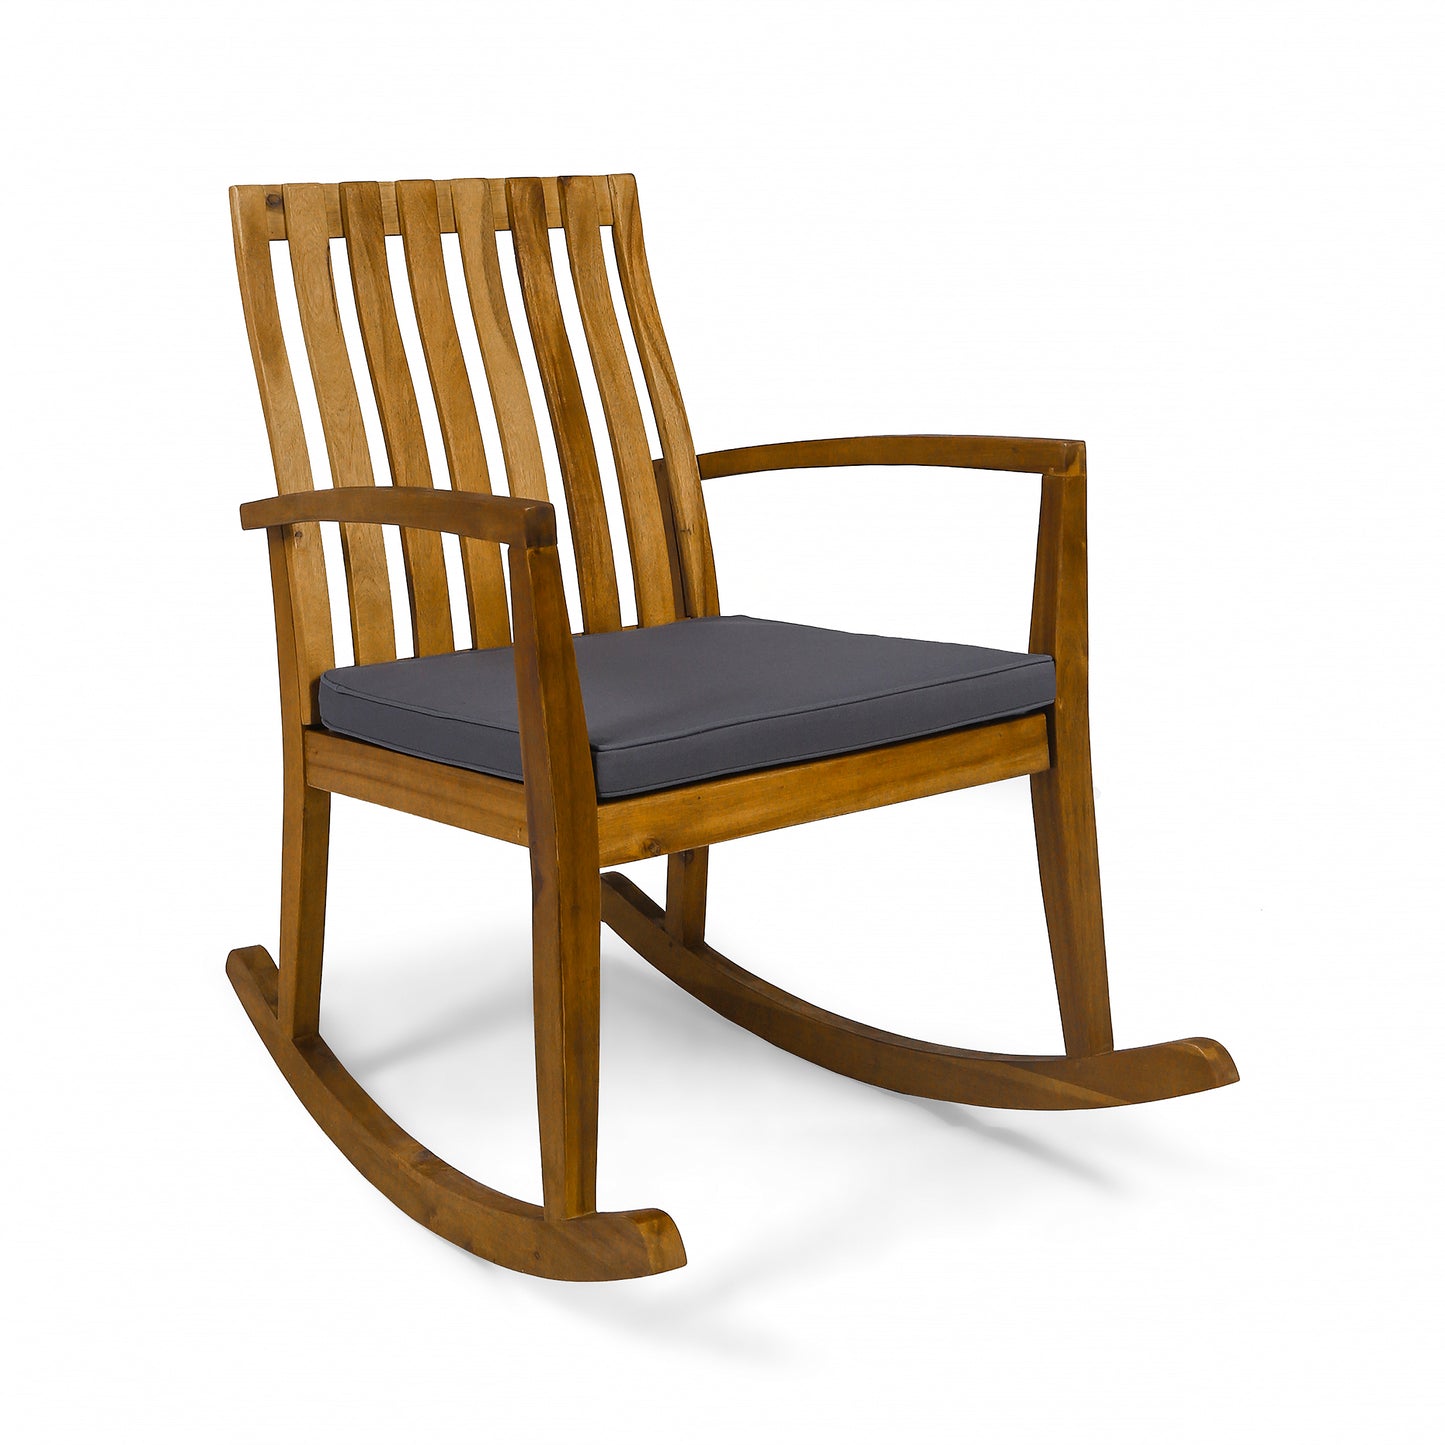 Colmena Acacia Wood Rustic Style Rocking Chair with Water Resistant Cushions